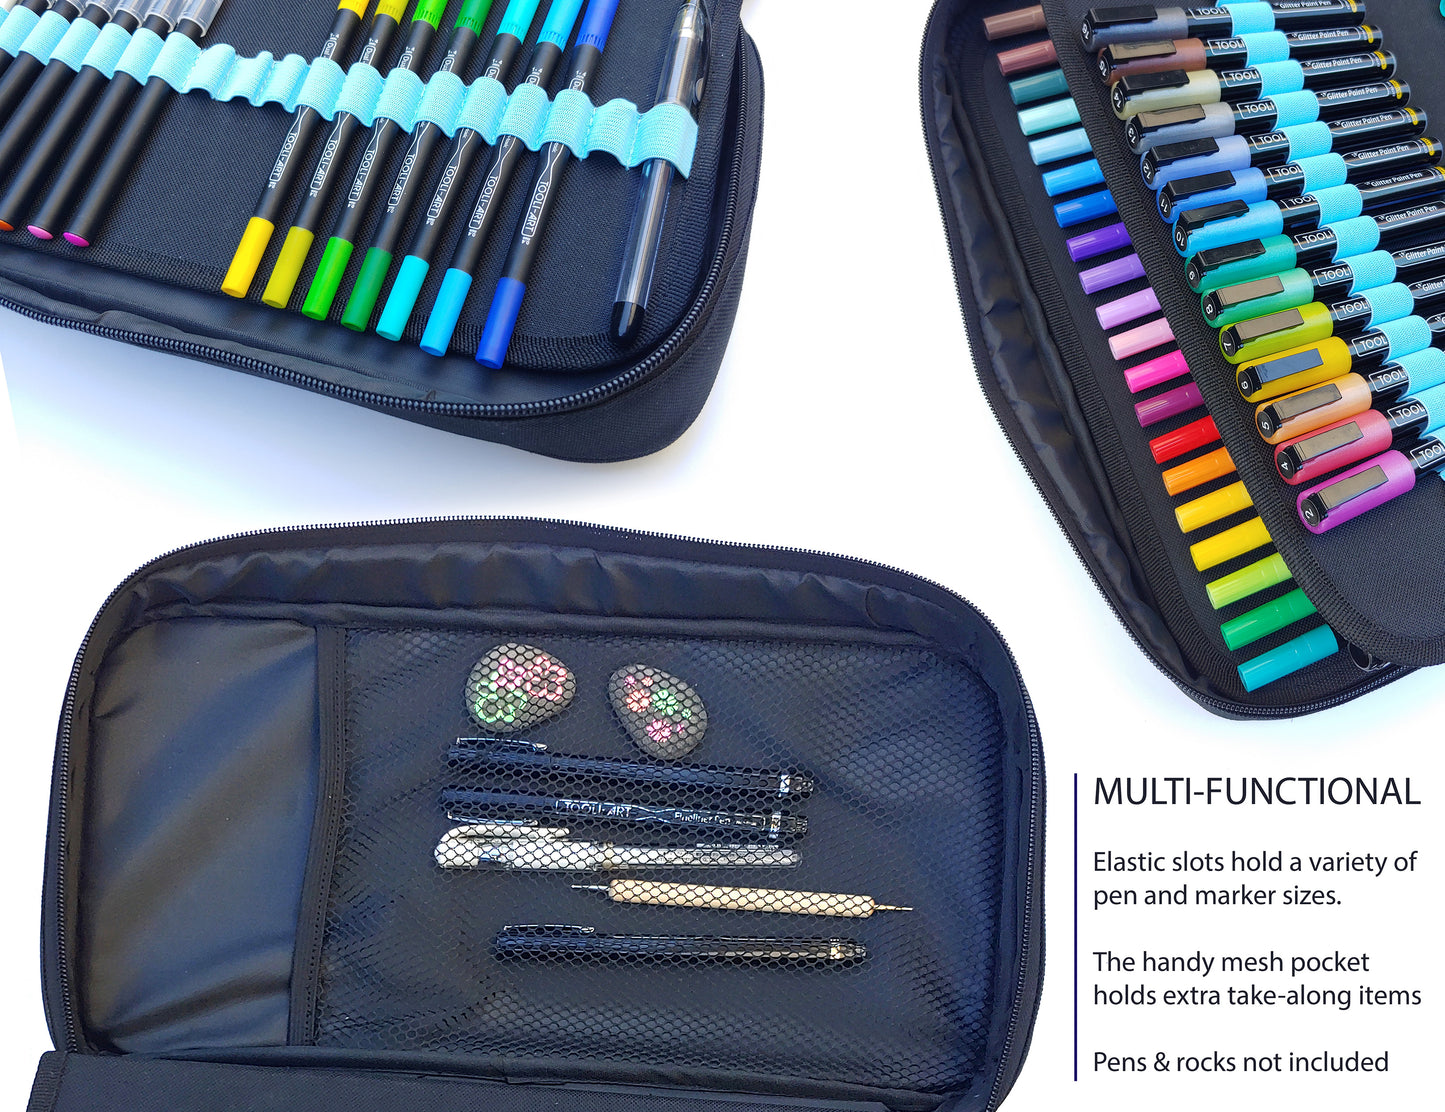 TOOLI-ART Marker & Pen Carrying Case -120 Slots, Black Canvas, Trolley Sleeve (PENS NOT INCLUDED)